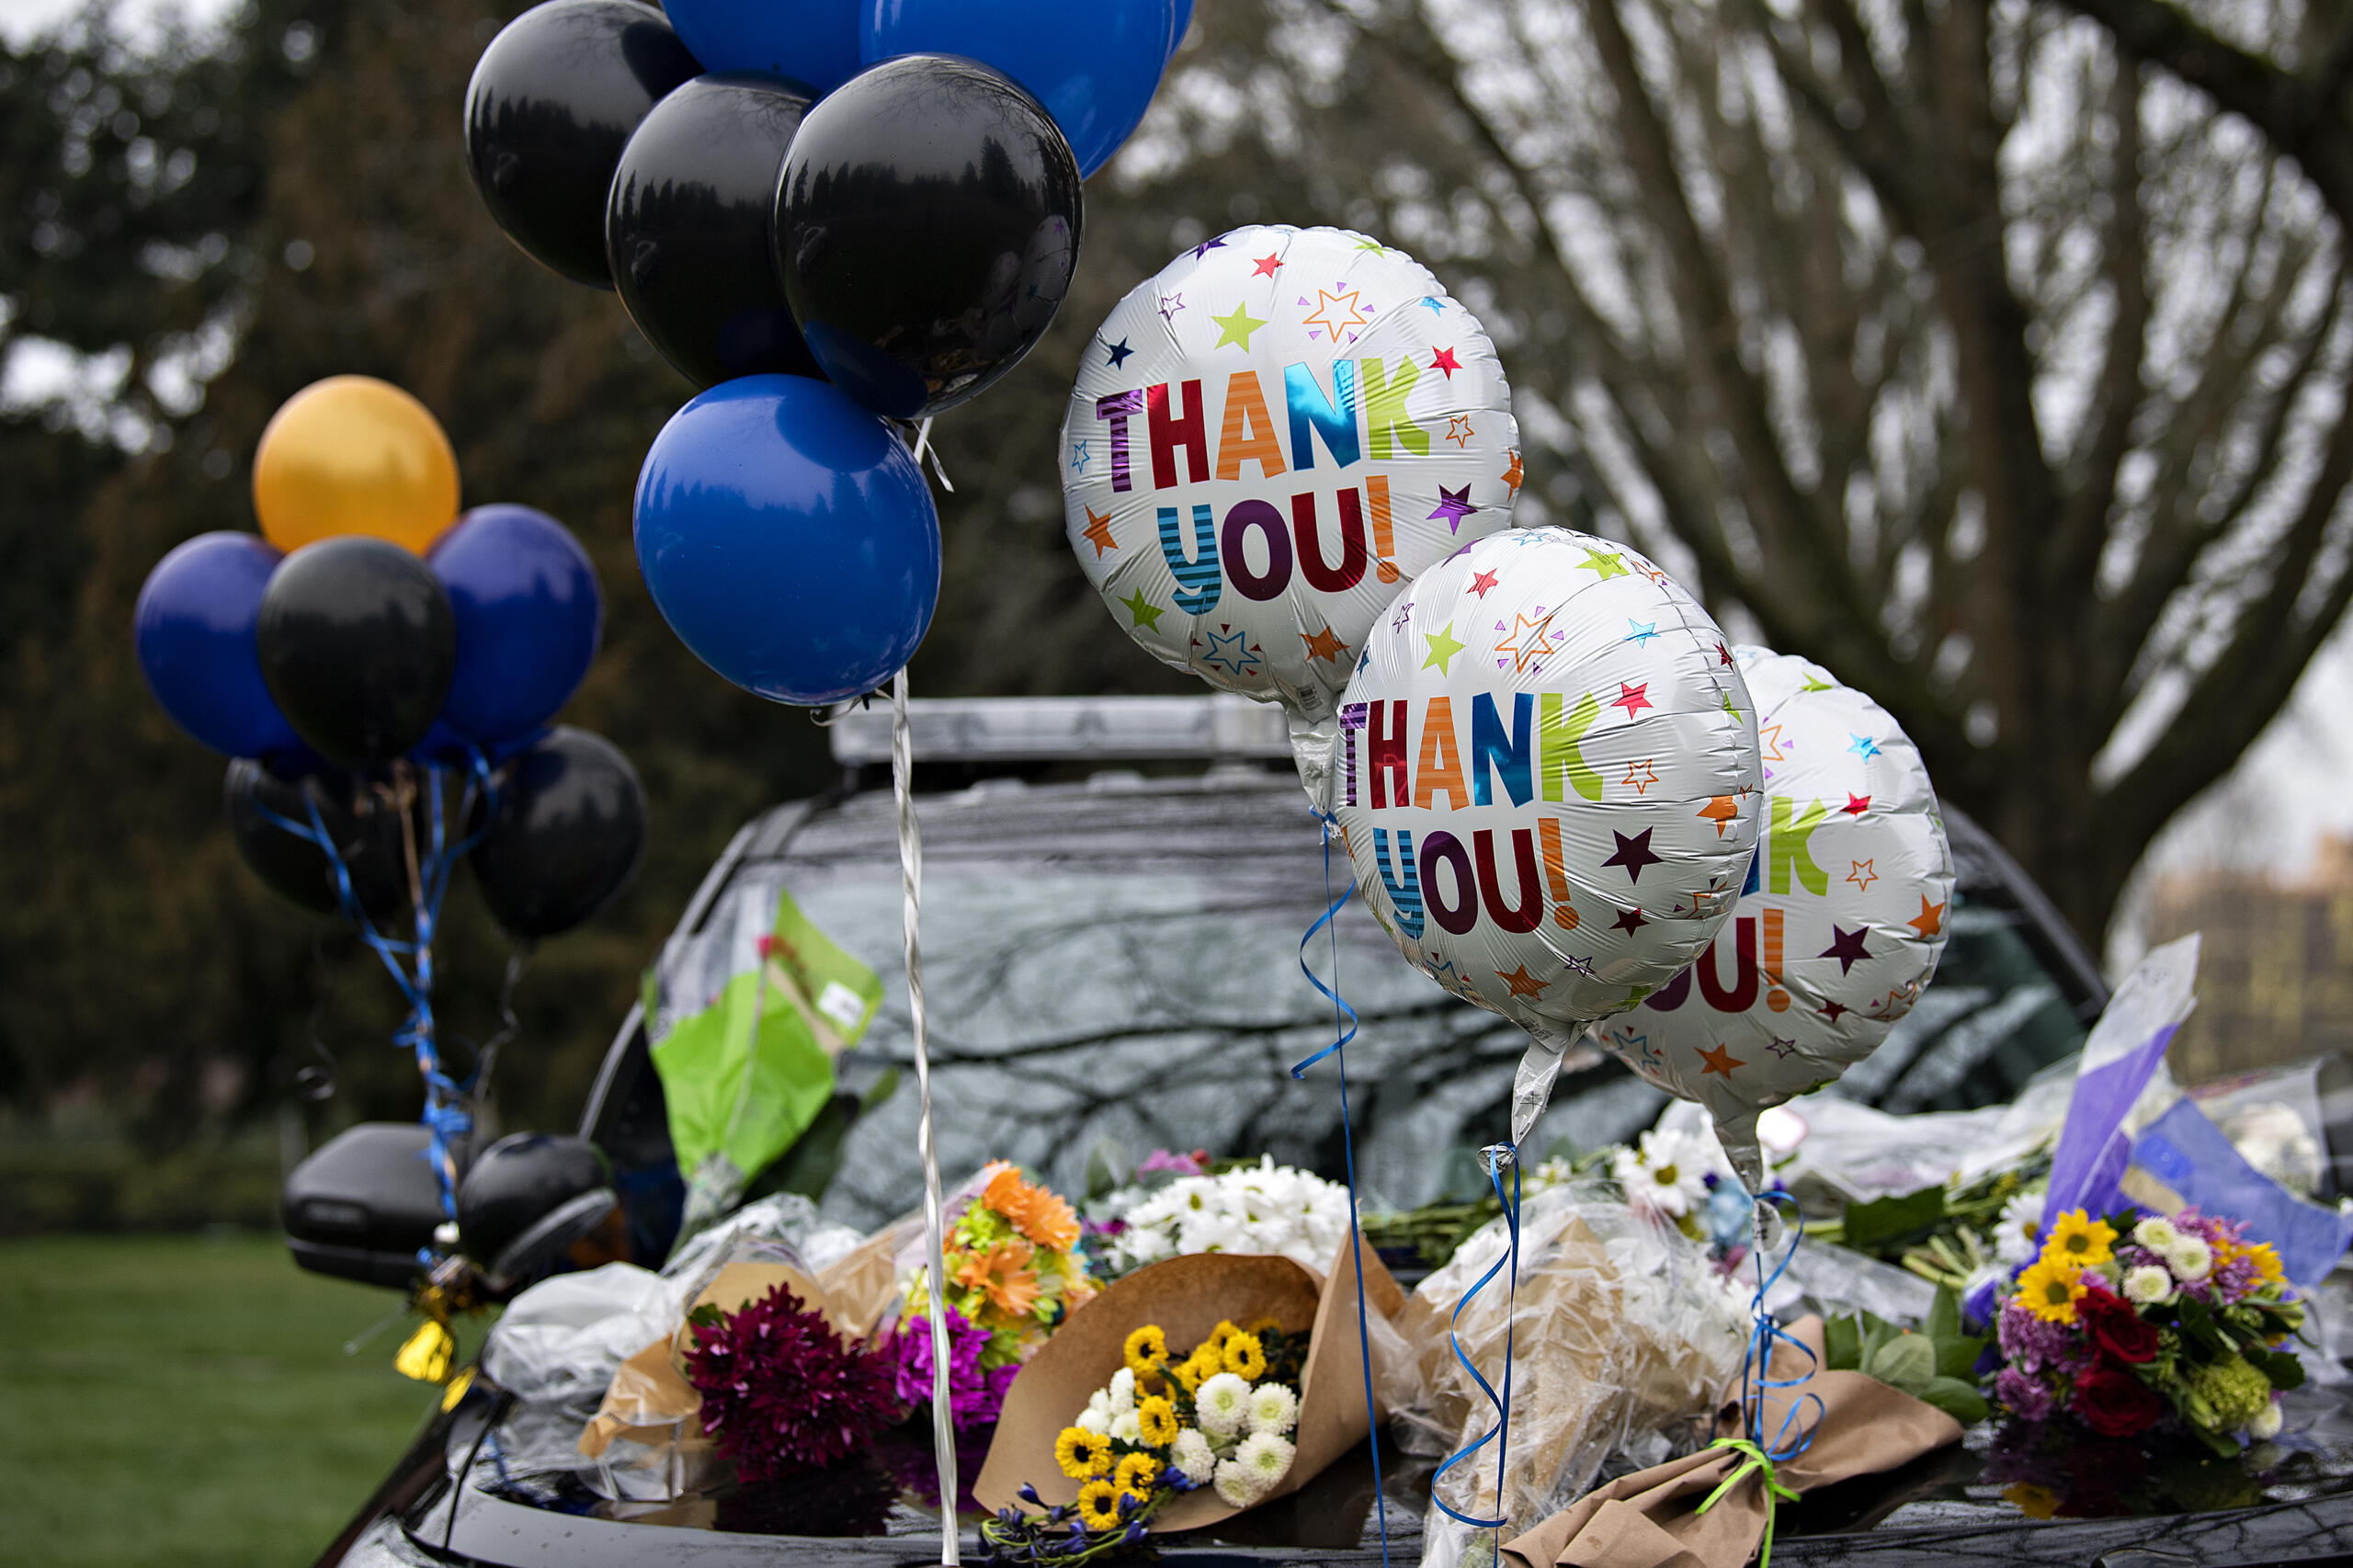 A memorial honors Officer Donald Sahota outside the Vancouver Police Department headquarters Friday morning, Feb. 4, 2022. Sahota, 52, was mistakenly shot at his home near Battle Ground by Clark County sheriffs Deputy Jonathan Feller during a manhunt for a robbery suspect Saturday night.